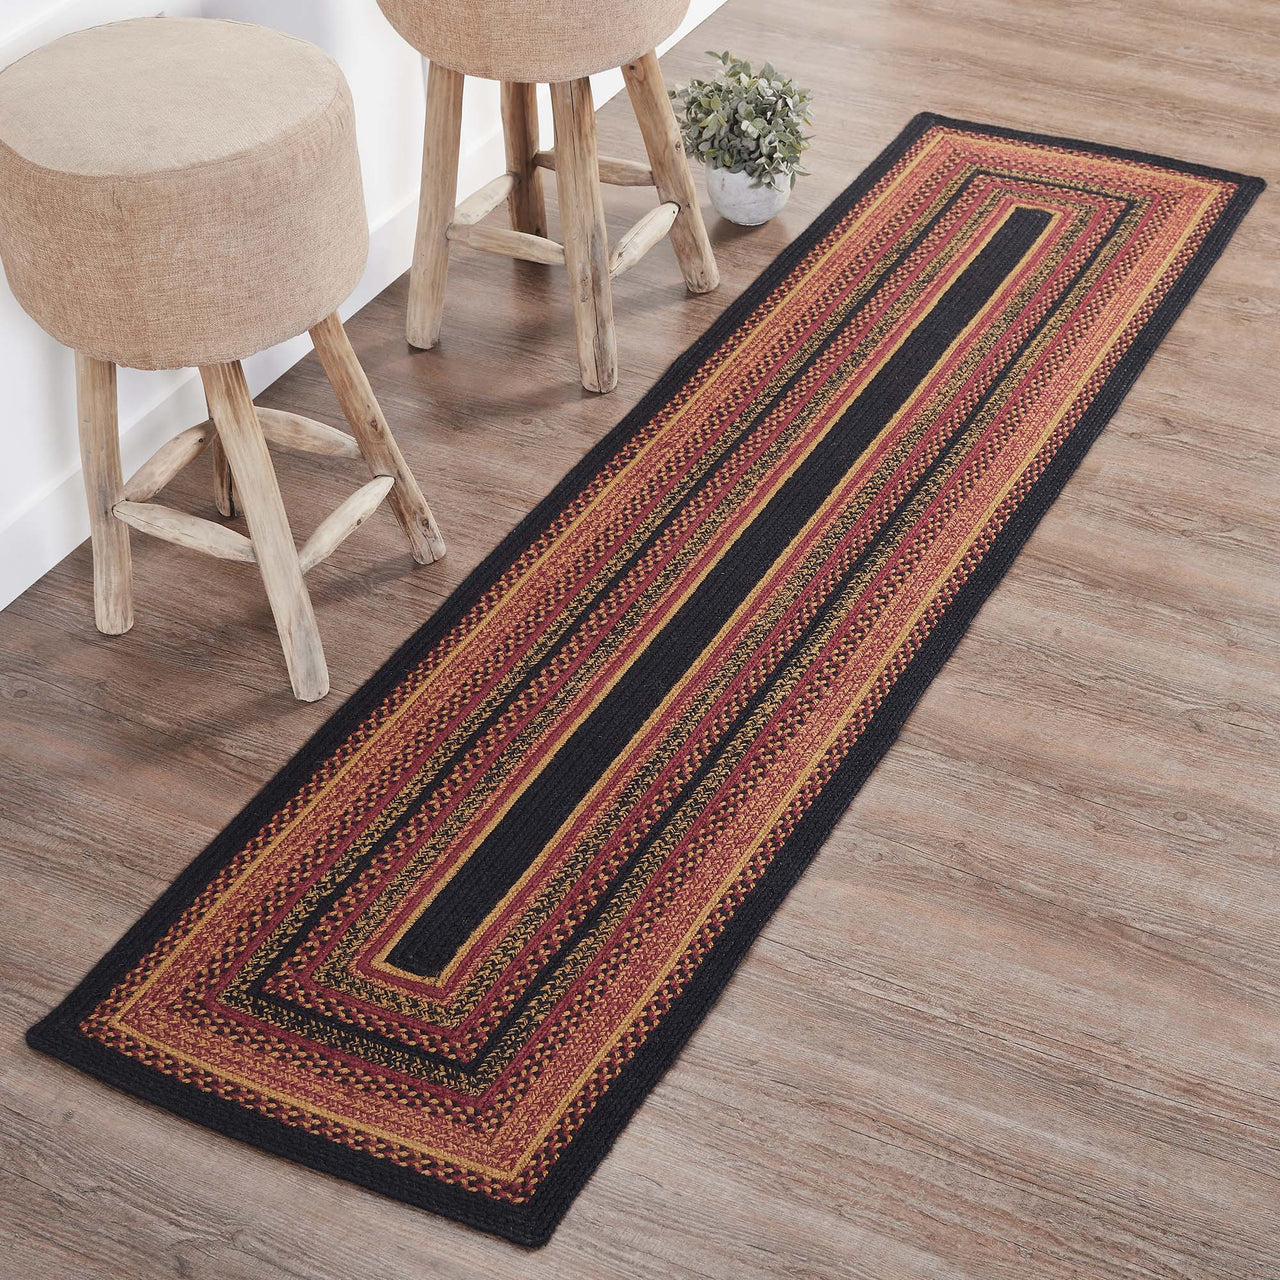 Heritage Farms Jute Braided Rug/Runner Rect. with Rug Pad 2'x8' VHC Brands